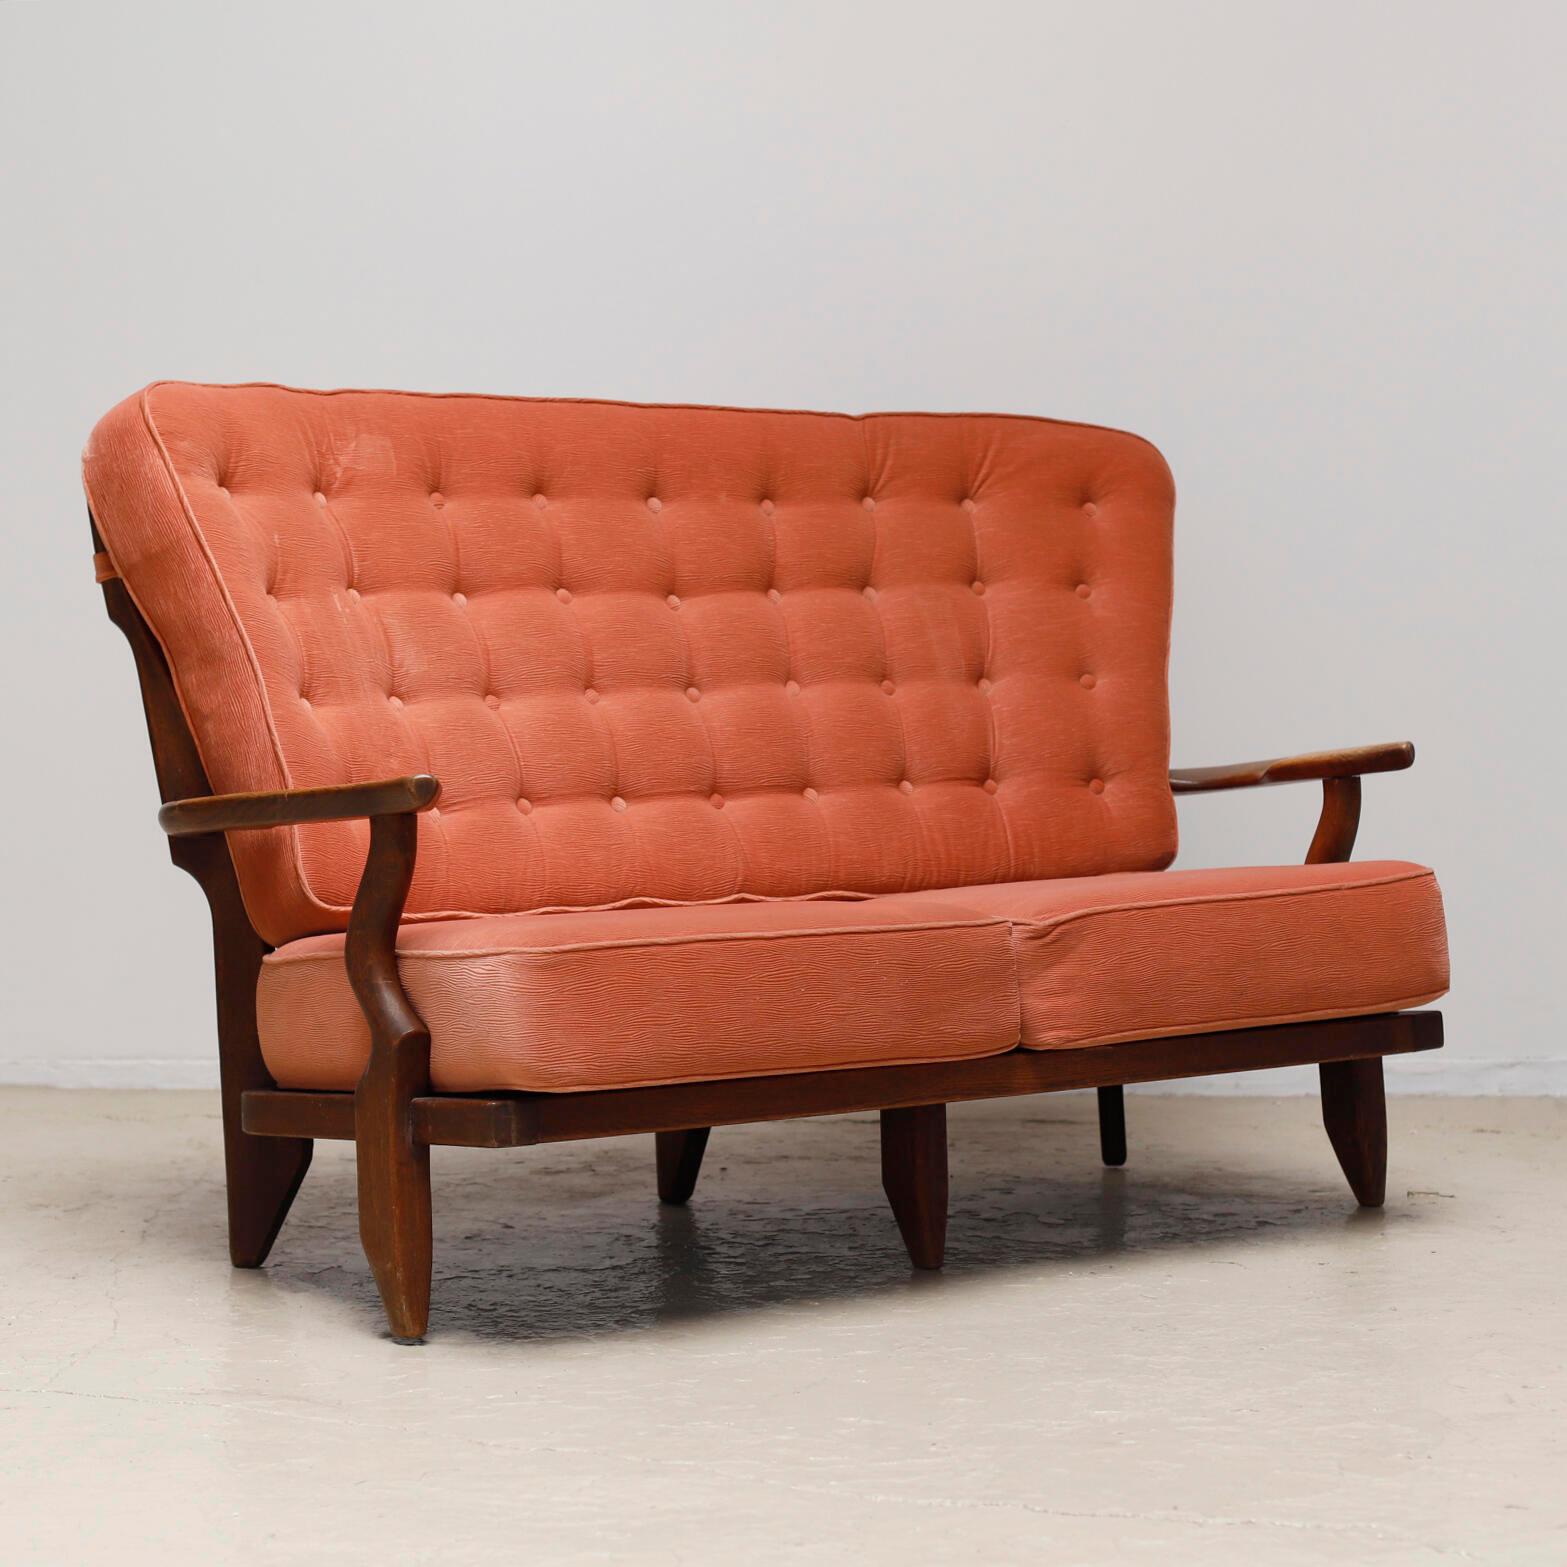 'Juliette' sofa designed by Guillerme et Chambron for Le mobilier Votre Maison in 1950s.
The carved oak frame and the original orange upholstery.
 